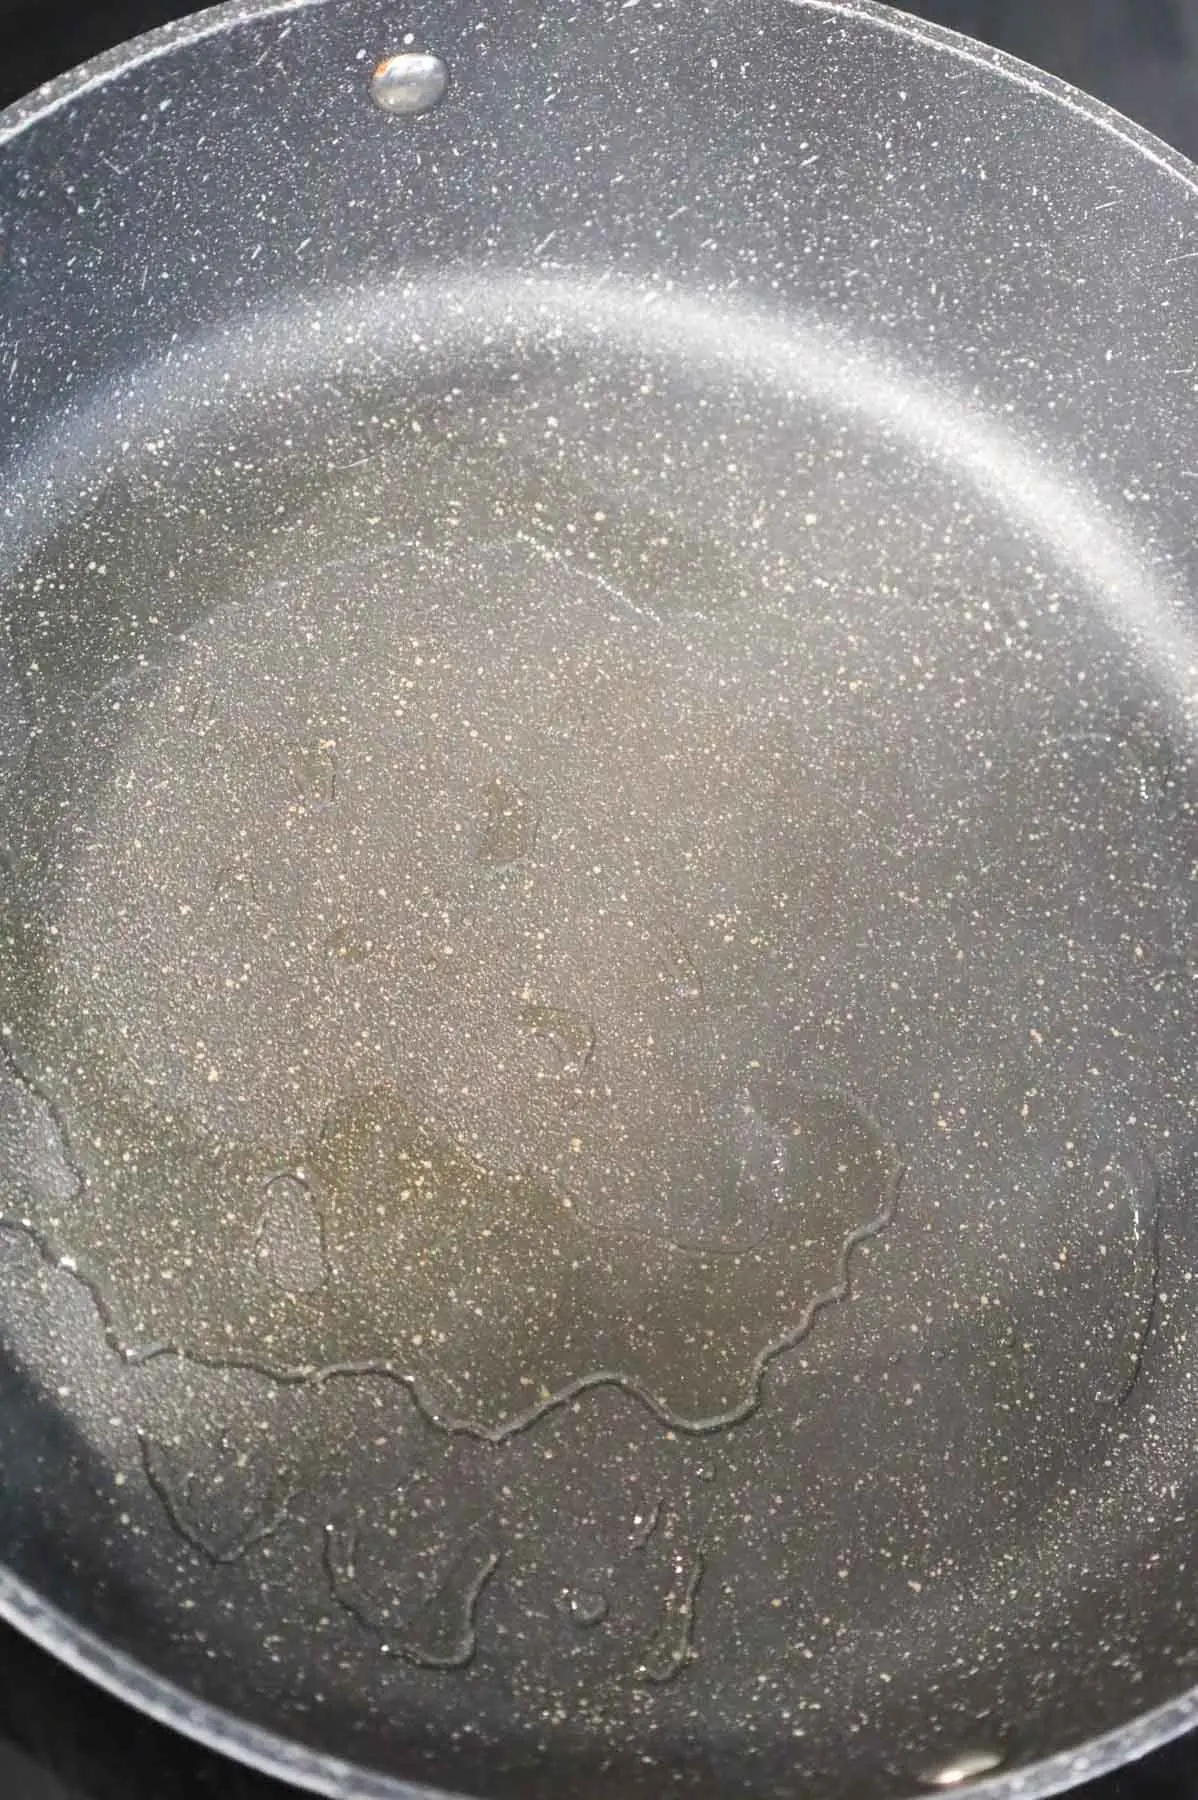 oil heating in a skillet